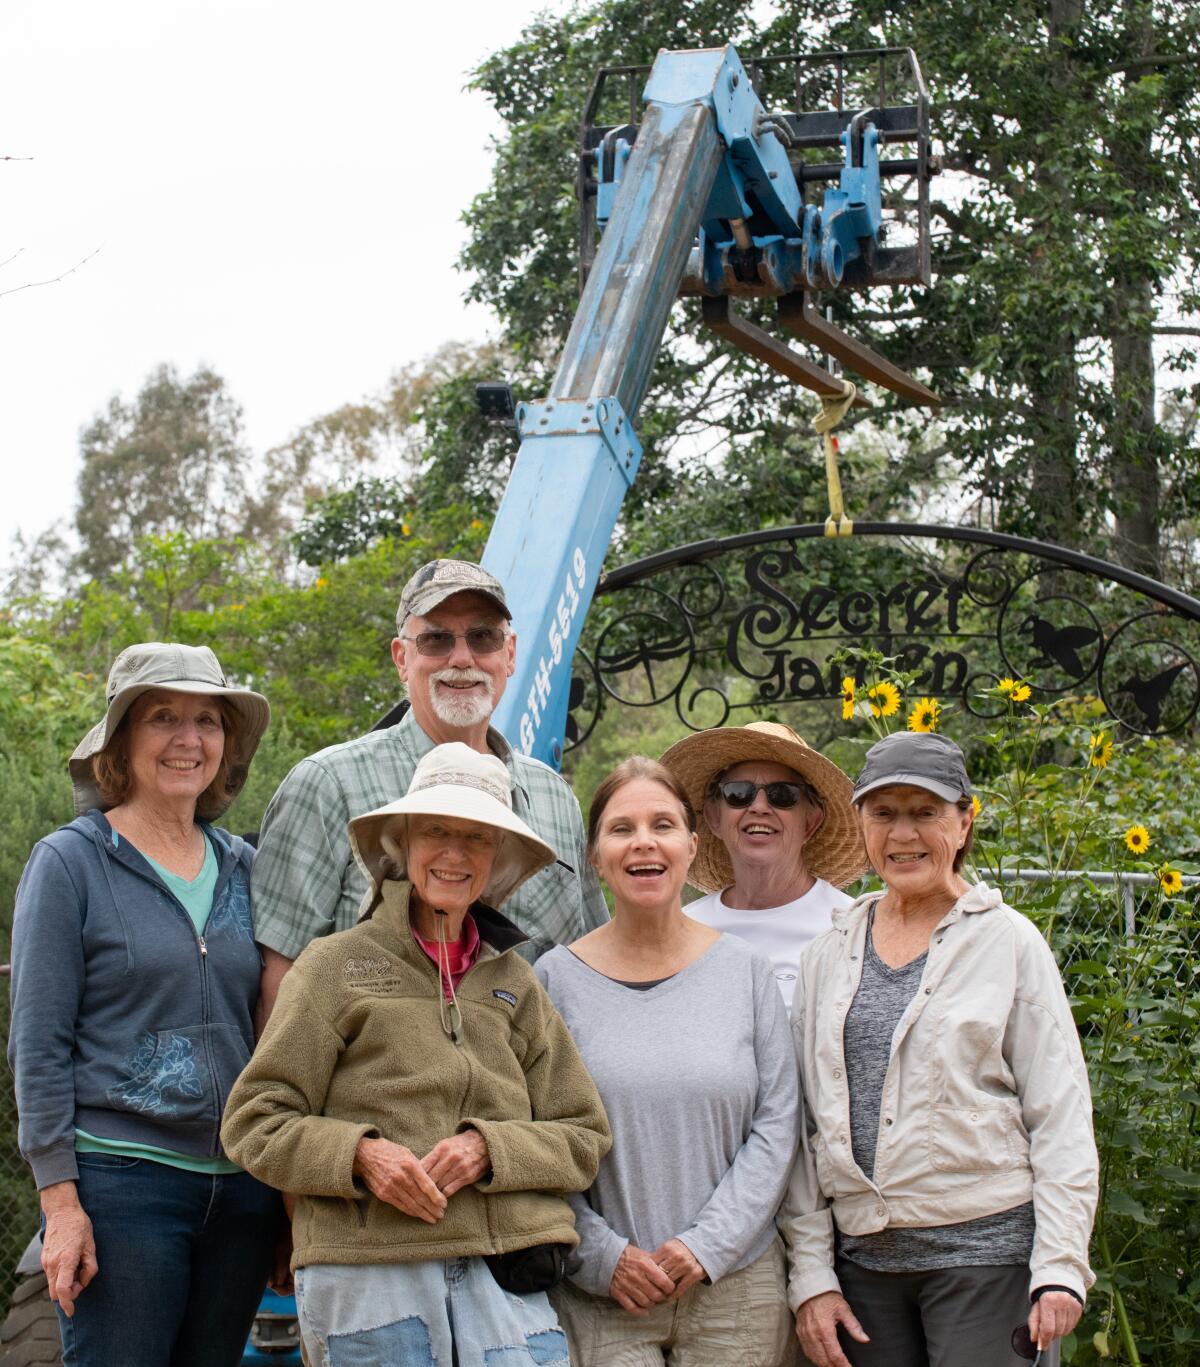 Members of the Huntington Beach Tree Society pose for a photo Friday at the entrance to the Secret Garden.